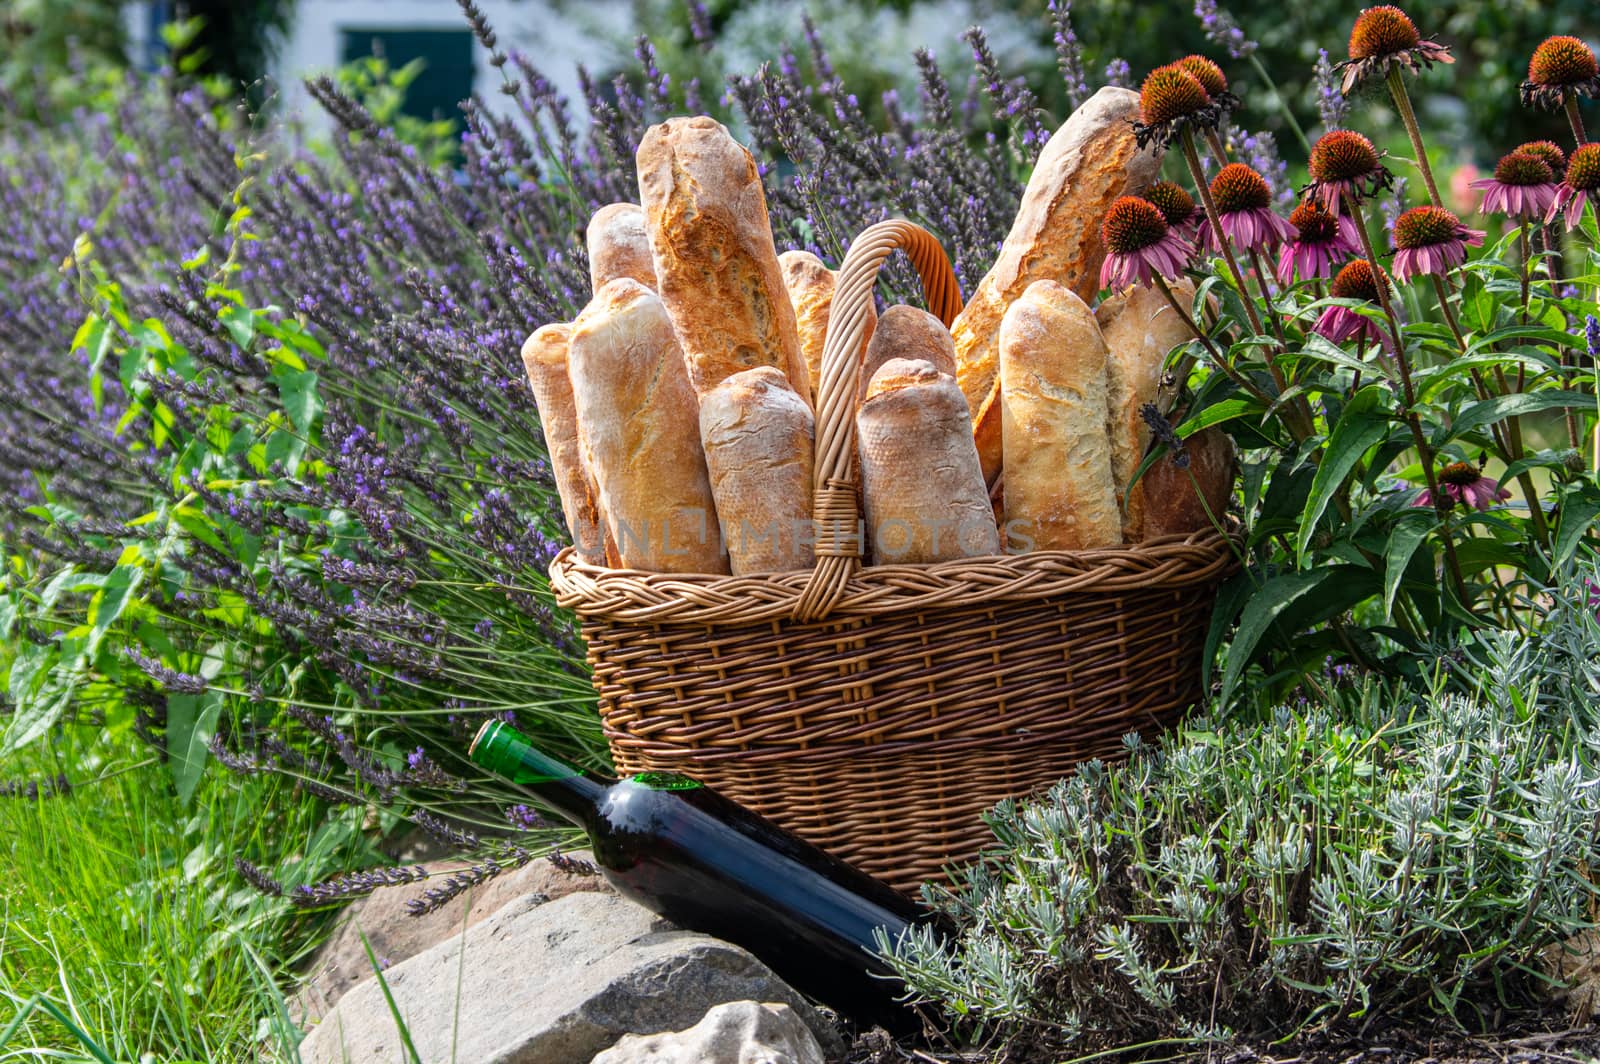 bottle of red wine and basket filled with french baguettes in lavender field by MarcoWarm